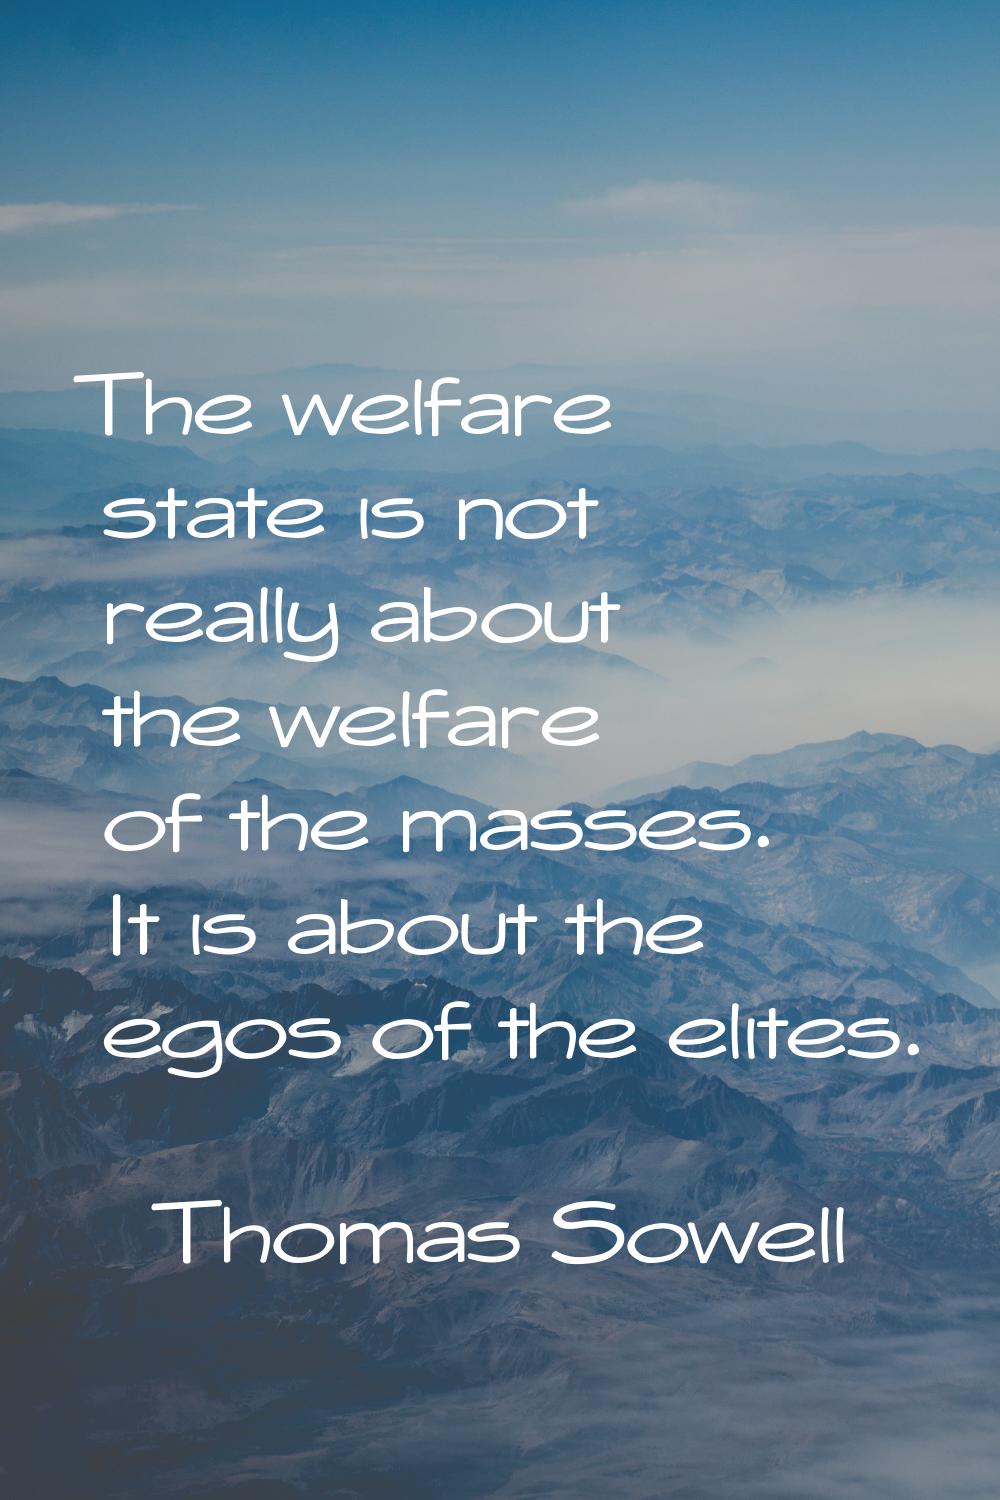 The welfare state is not really about the welfare of the masses. It is about the egos of the elites